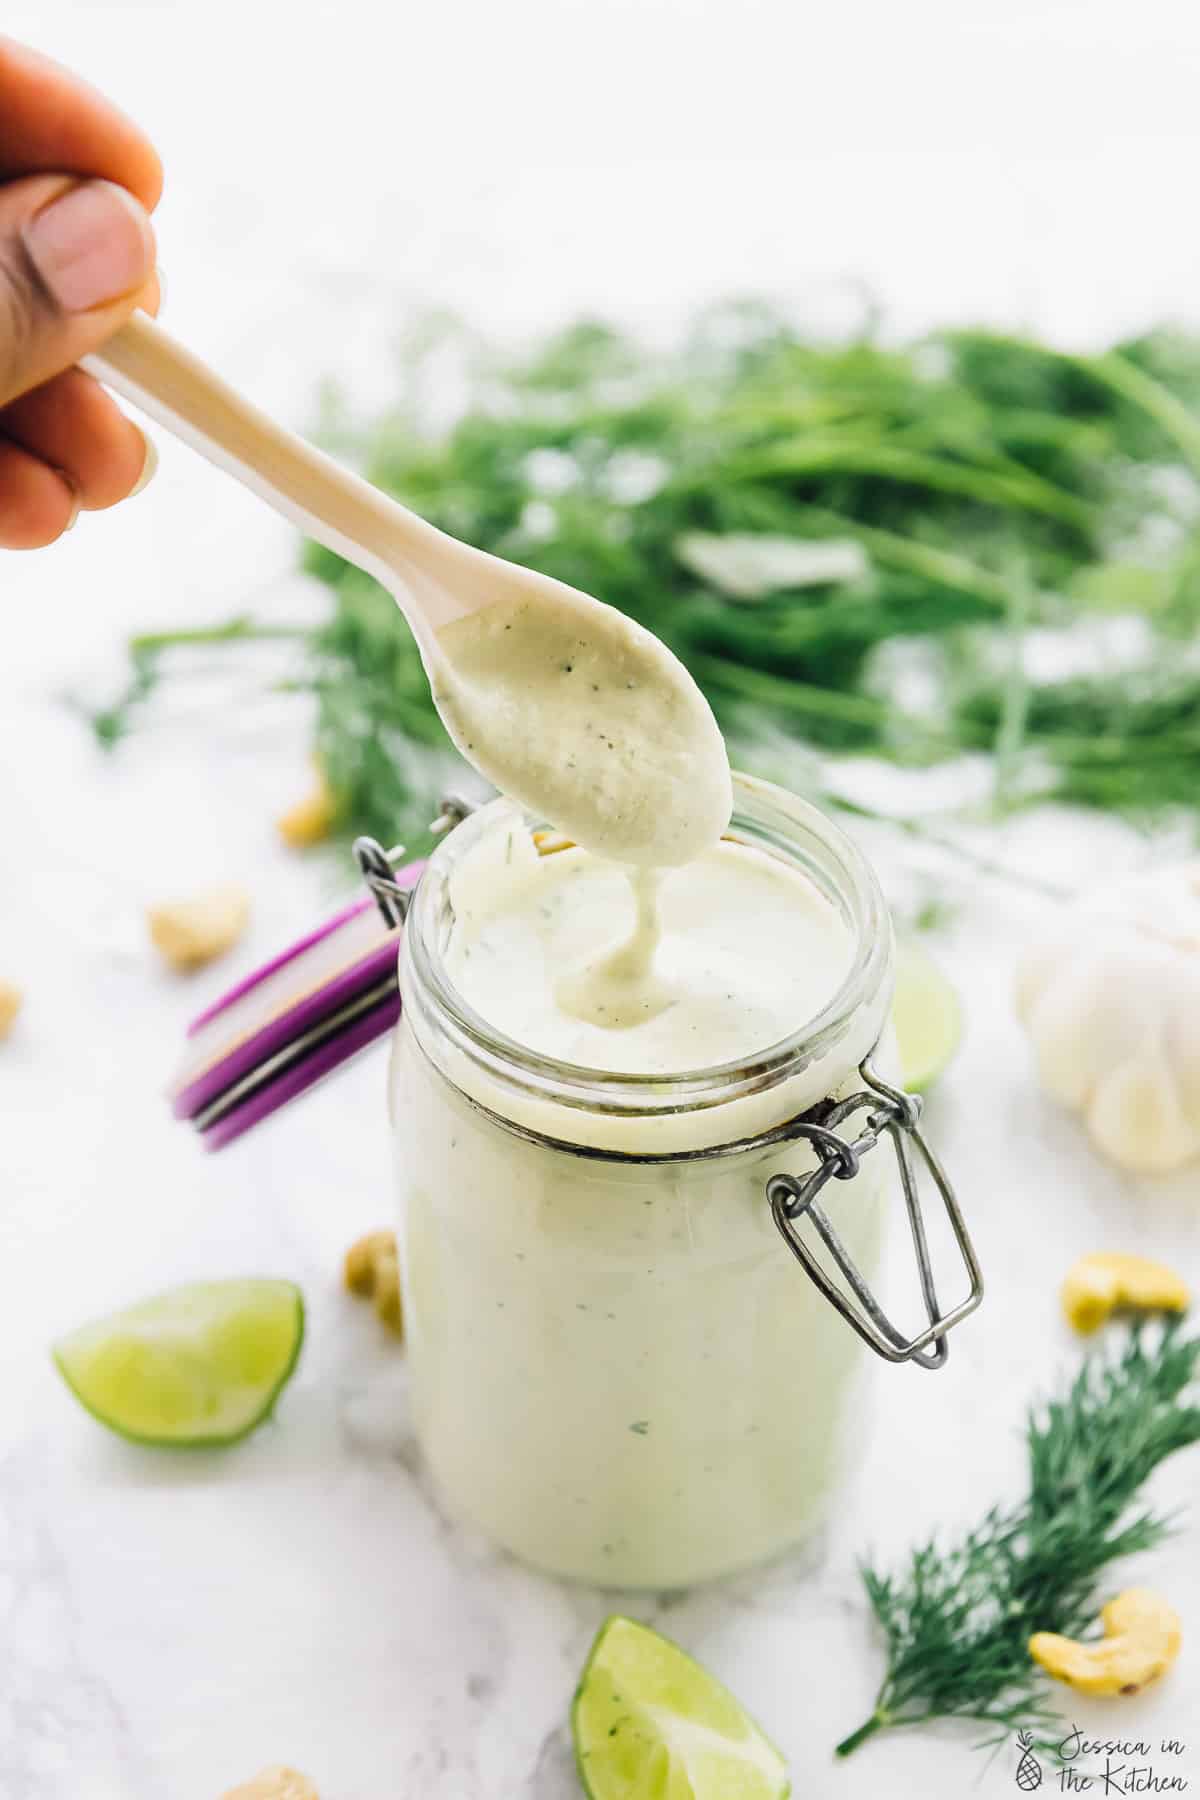 A hand dipping a spoon into vegan ranch dressing.